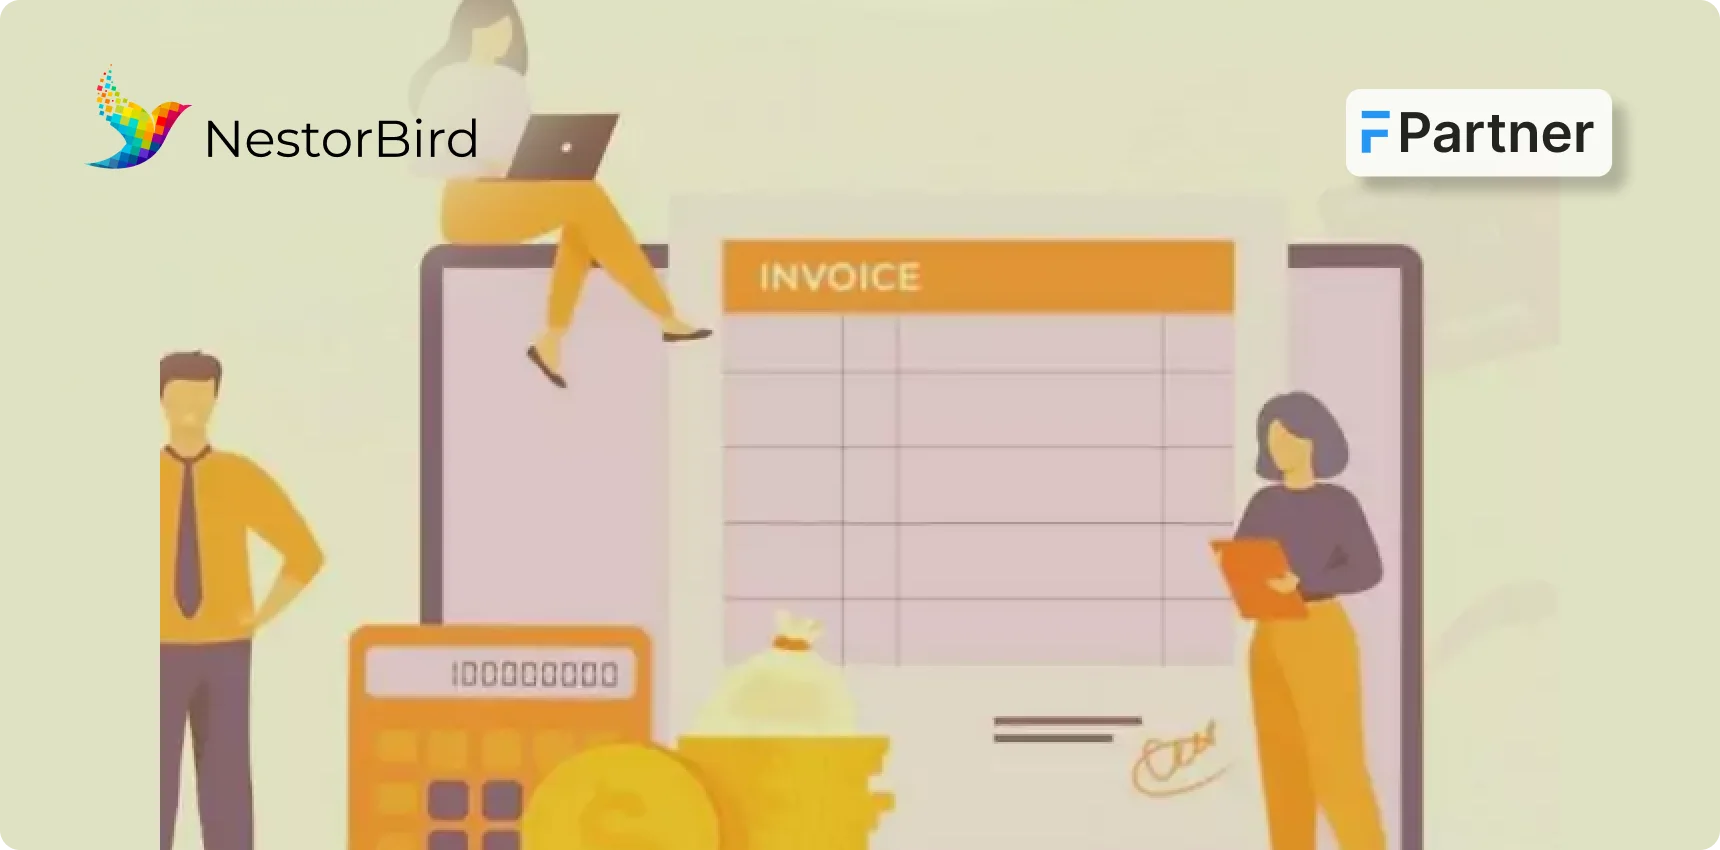 How Can ERP Work as an Effective Technology Offering GST E-Invoicing Software Solutions?